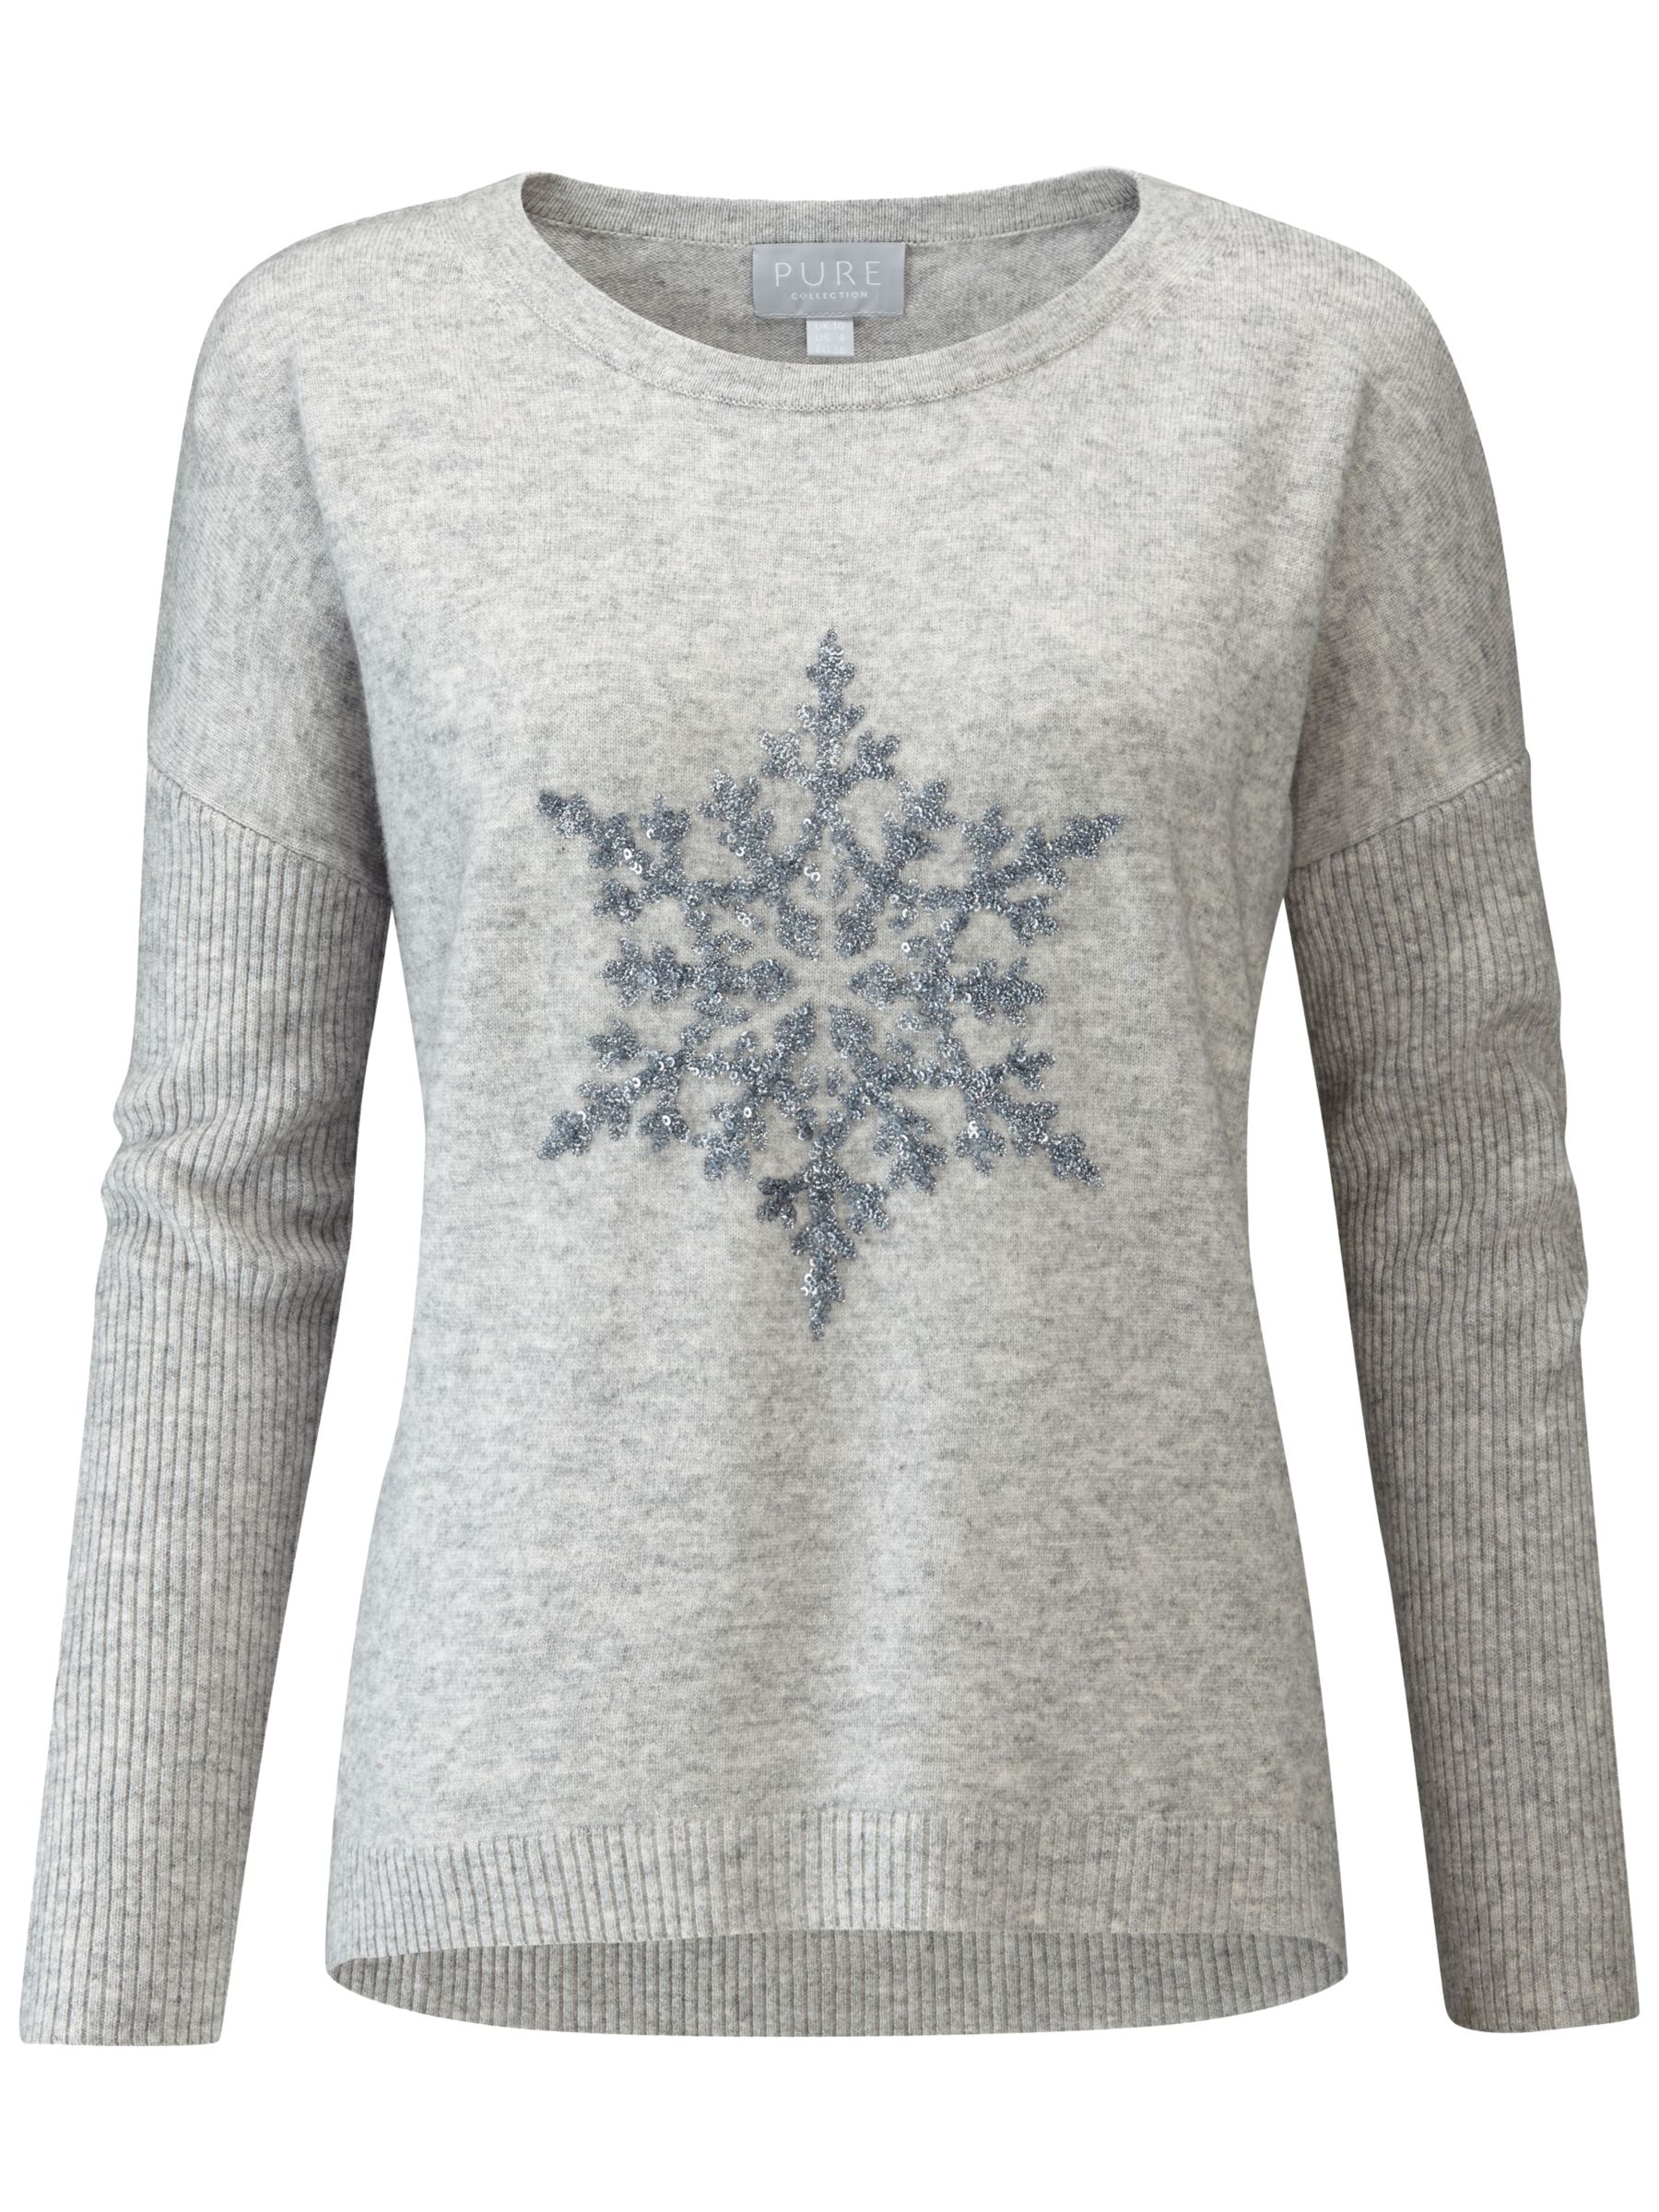 Pure Collection Sparkle Snowflake Dipped Hem Jumper, Grey, 10